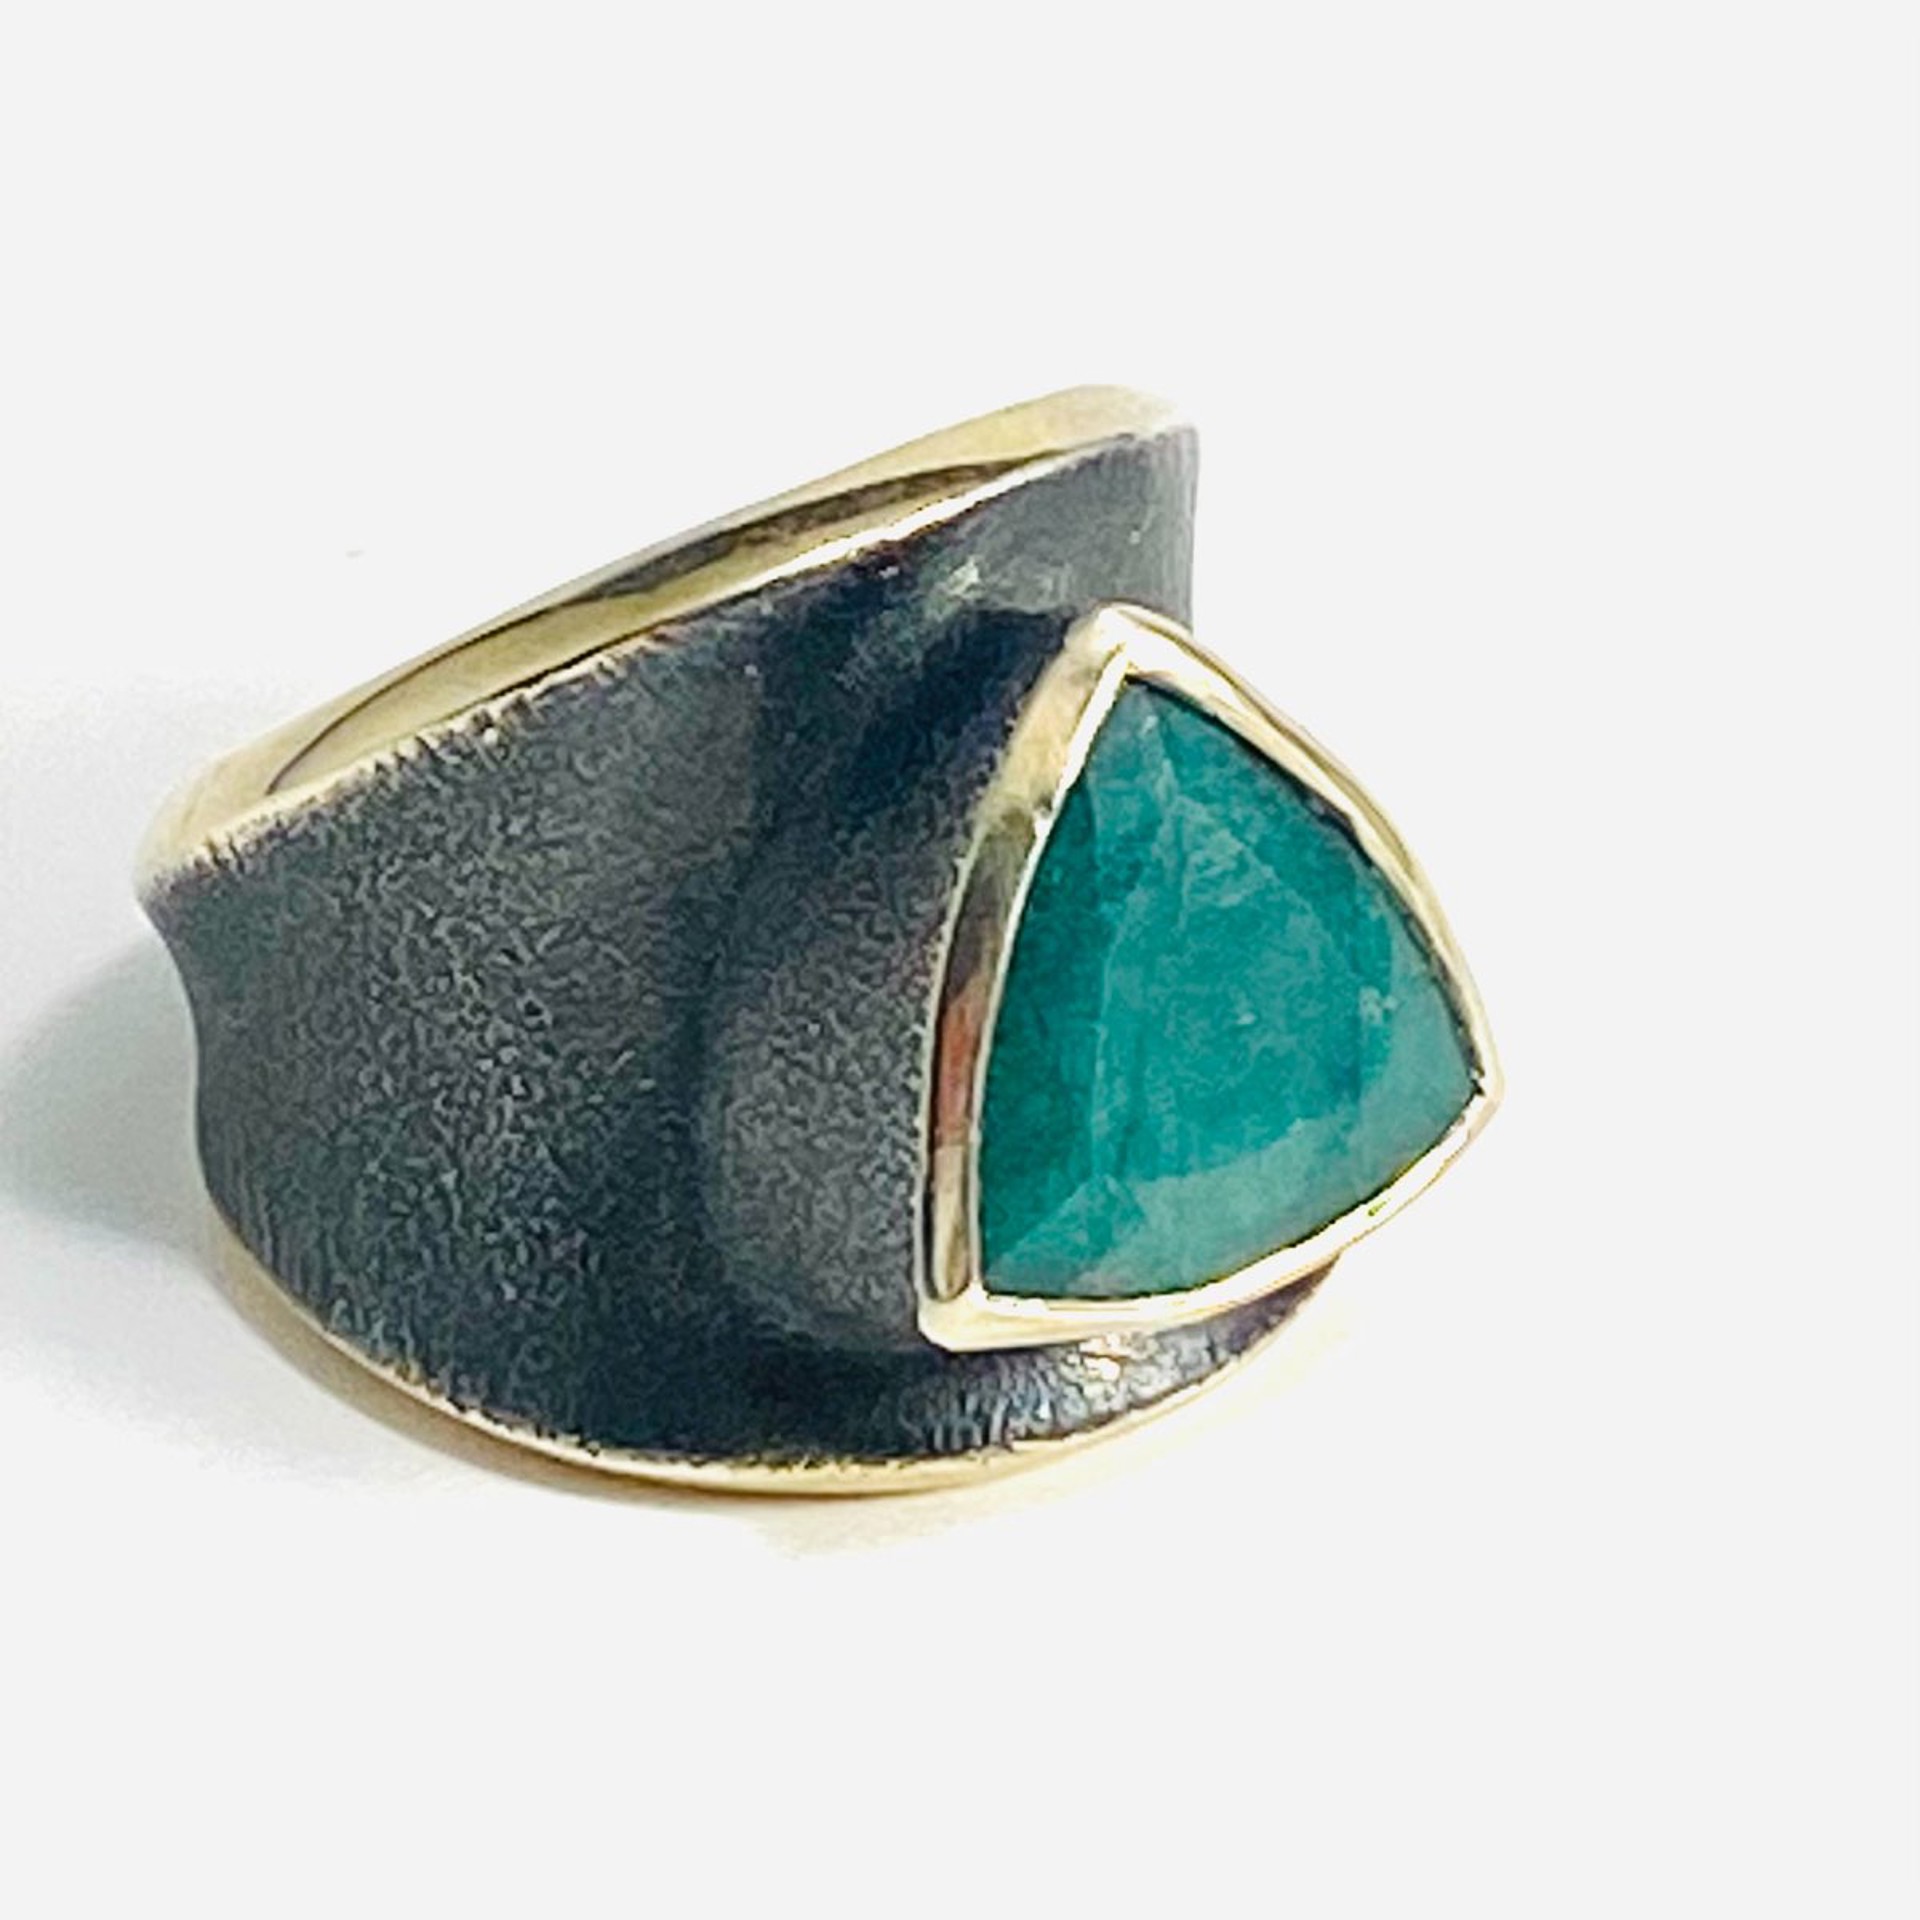 Large Faceted Indian Emerald Oxidized Wide Band Ring sz10 by Bora